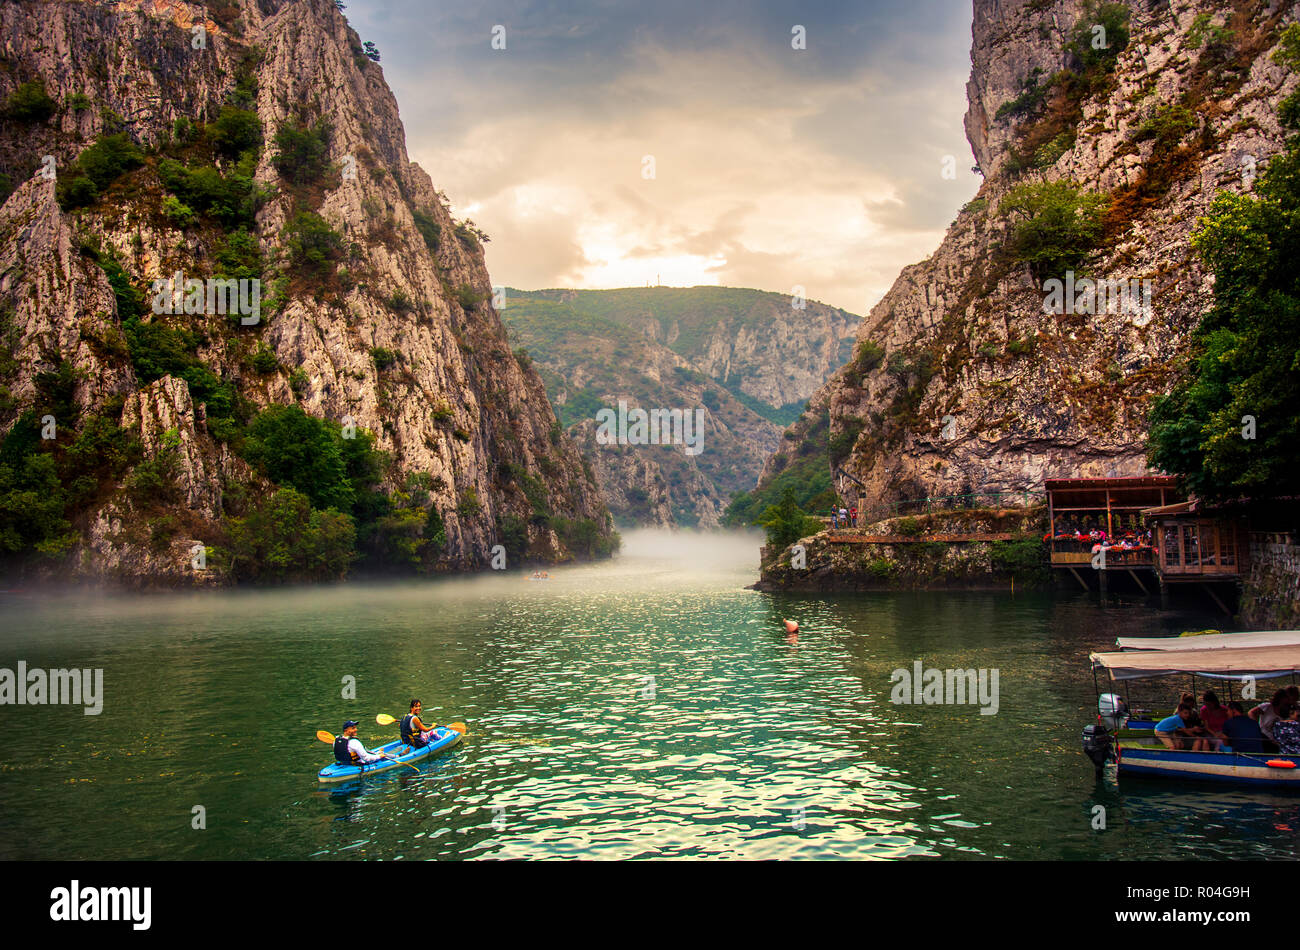 Matka, Macedonia - August 26, 2018: Canyon Matka near Skopje, with people kayaking and magical foggy scenery with calm water Stock Photo